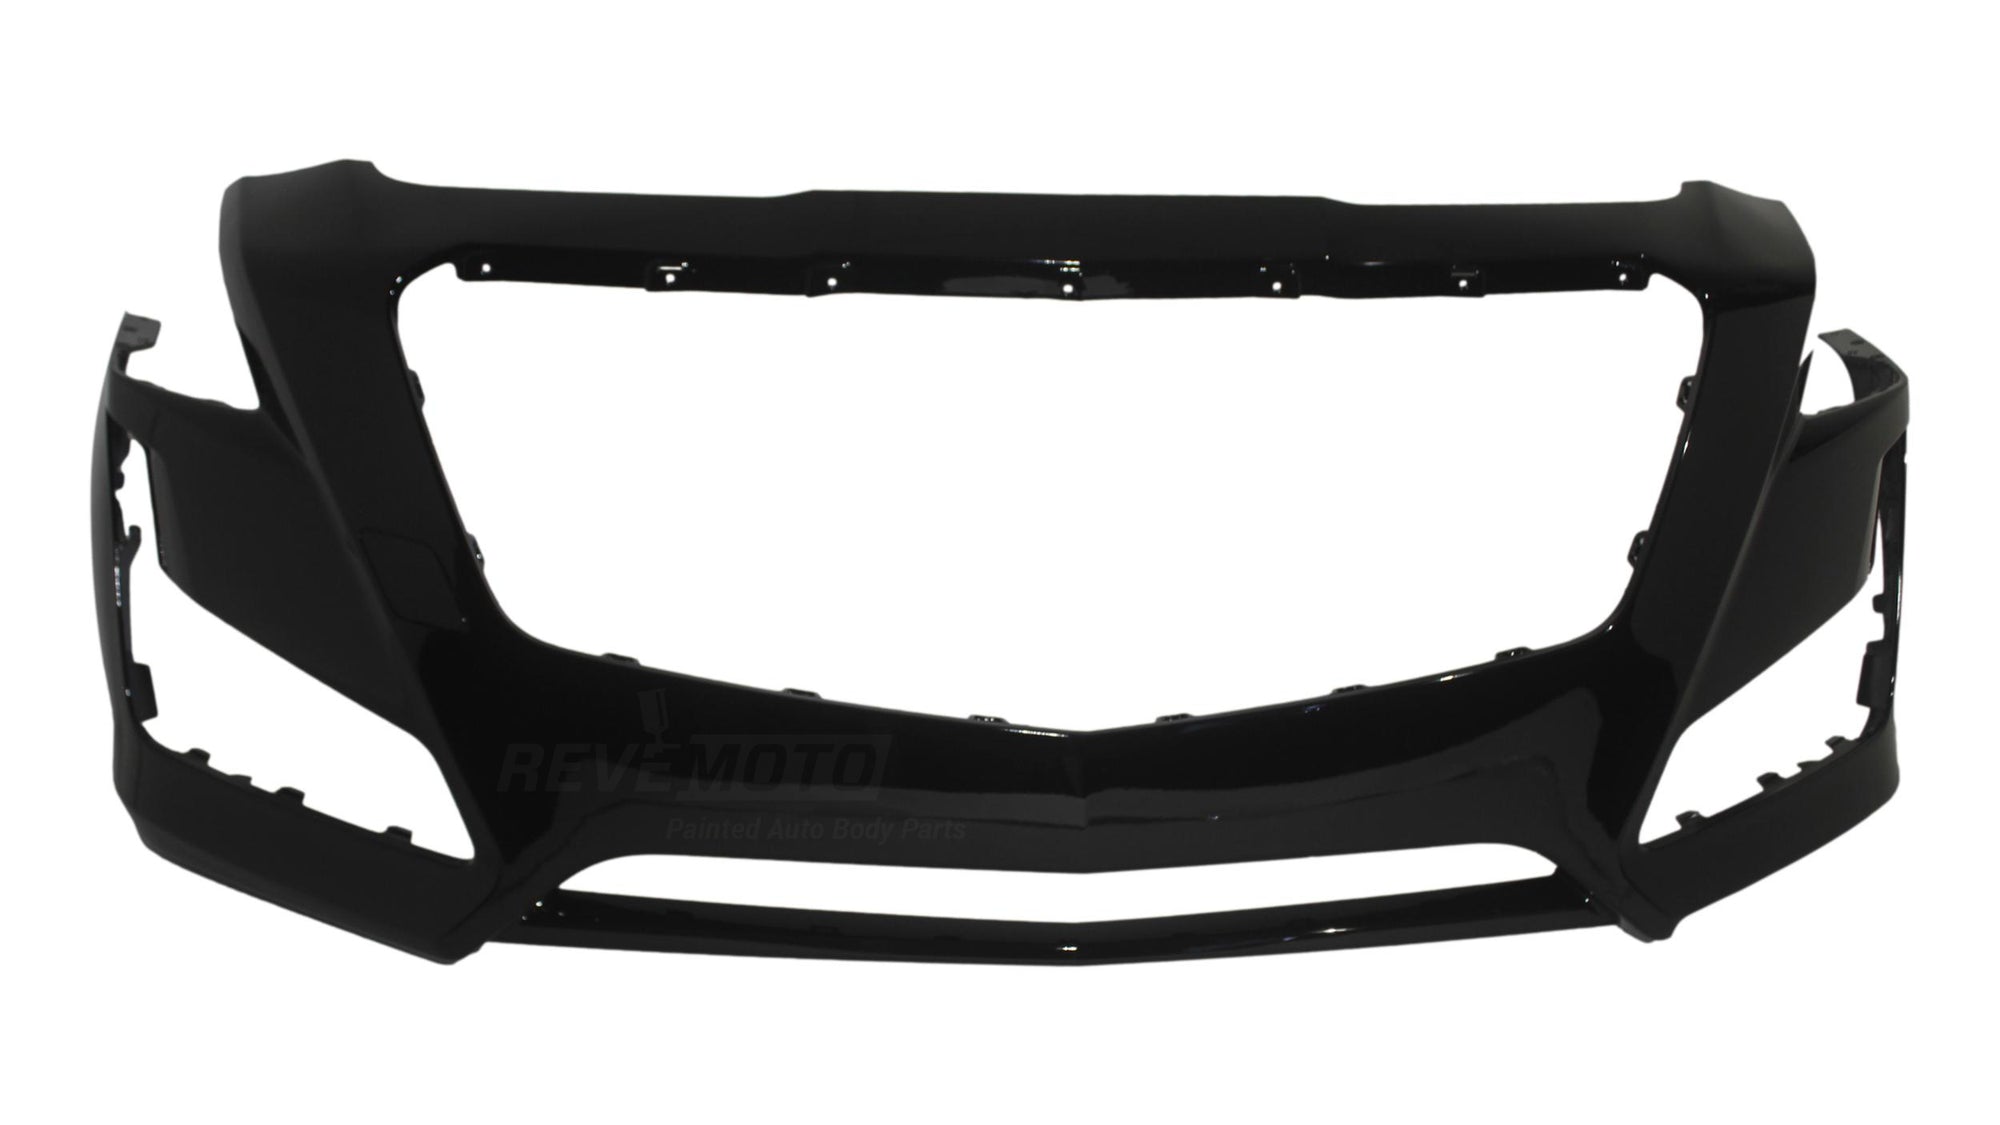 2014-2019 Cadillac CTS Front Bumper Painted (Aftermarket | WITHOUT: Collision Alert and Park Assist Sensor Holes) Black (WA8555) 84033411 GM1000956